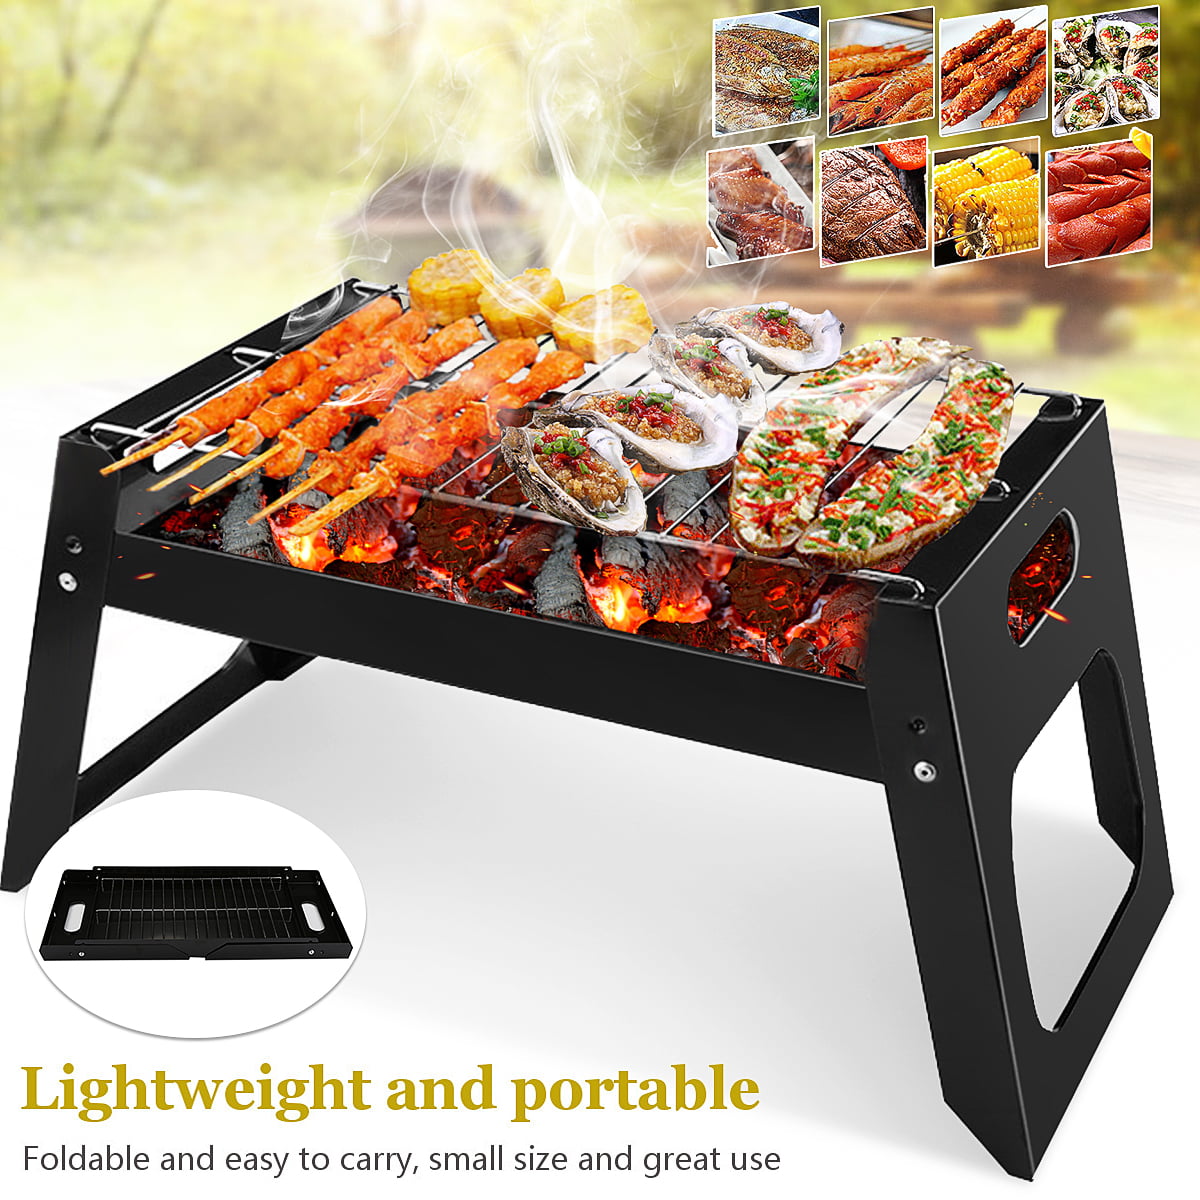 Black Folding Portable BBQ Barbecue Charcoal Grill Camping Graden Outdoor Travel 